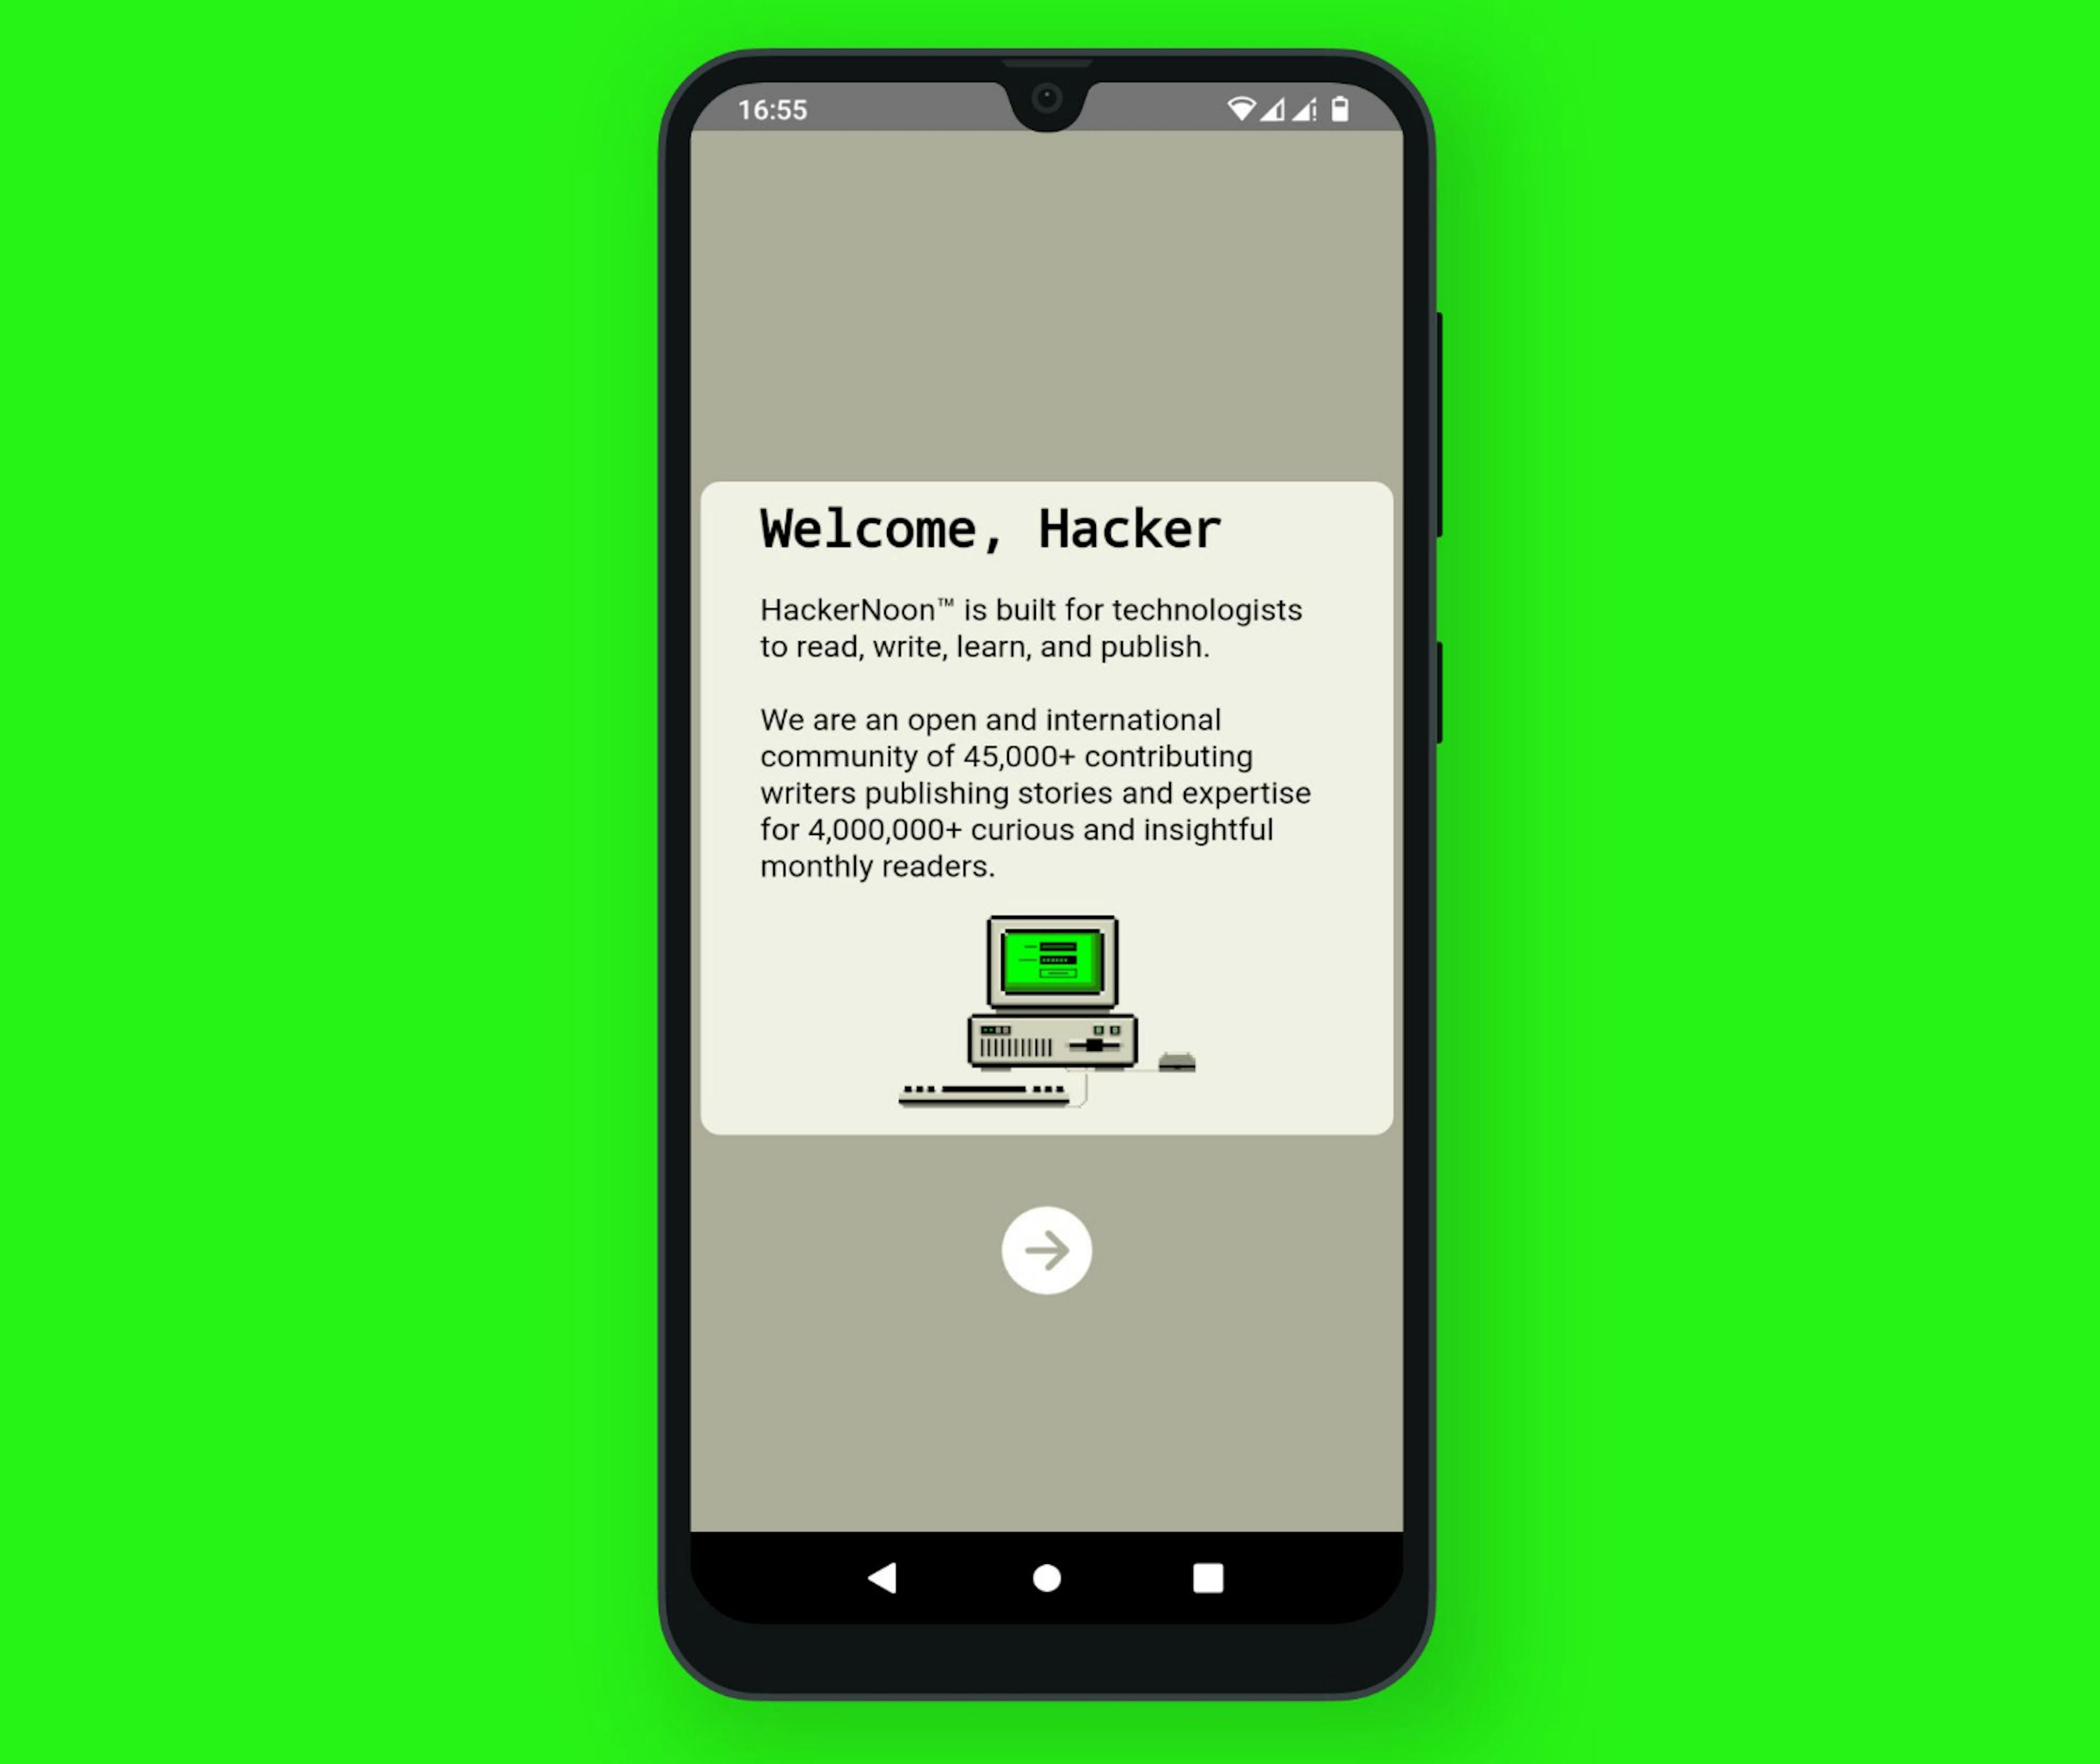 featured image - HackerNoon App Review: The Mobile Experience in Images